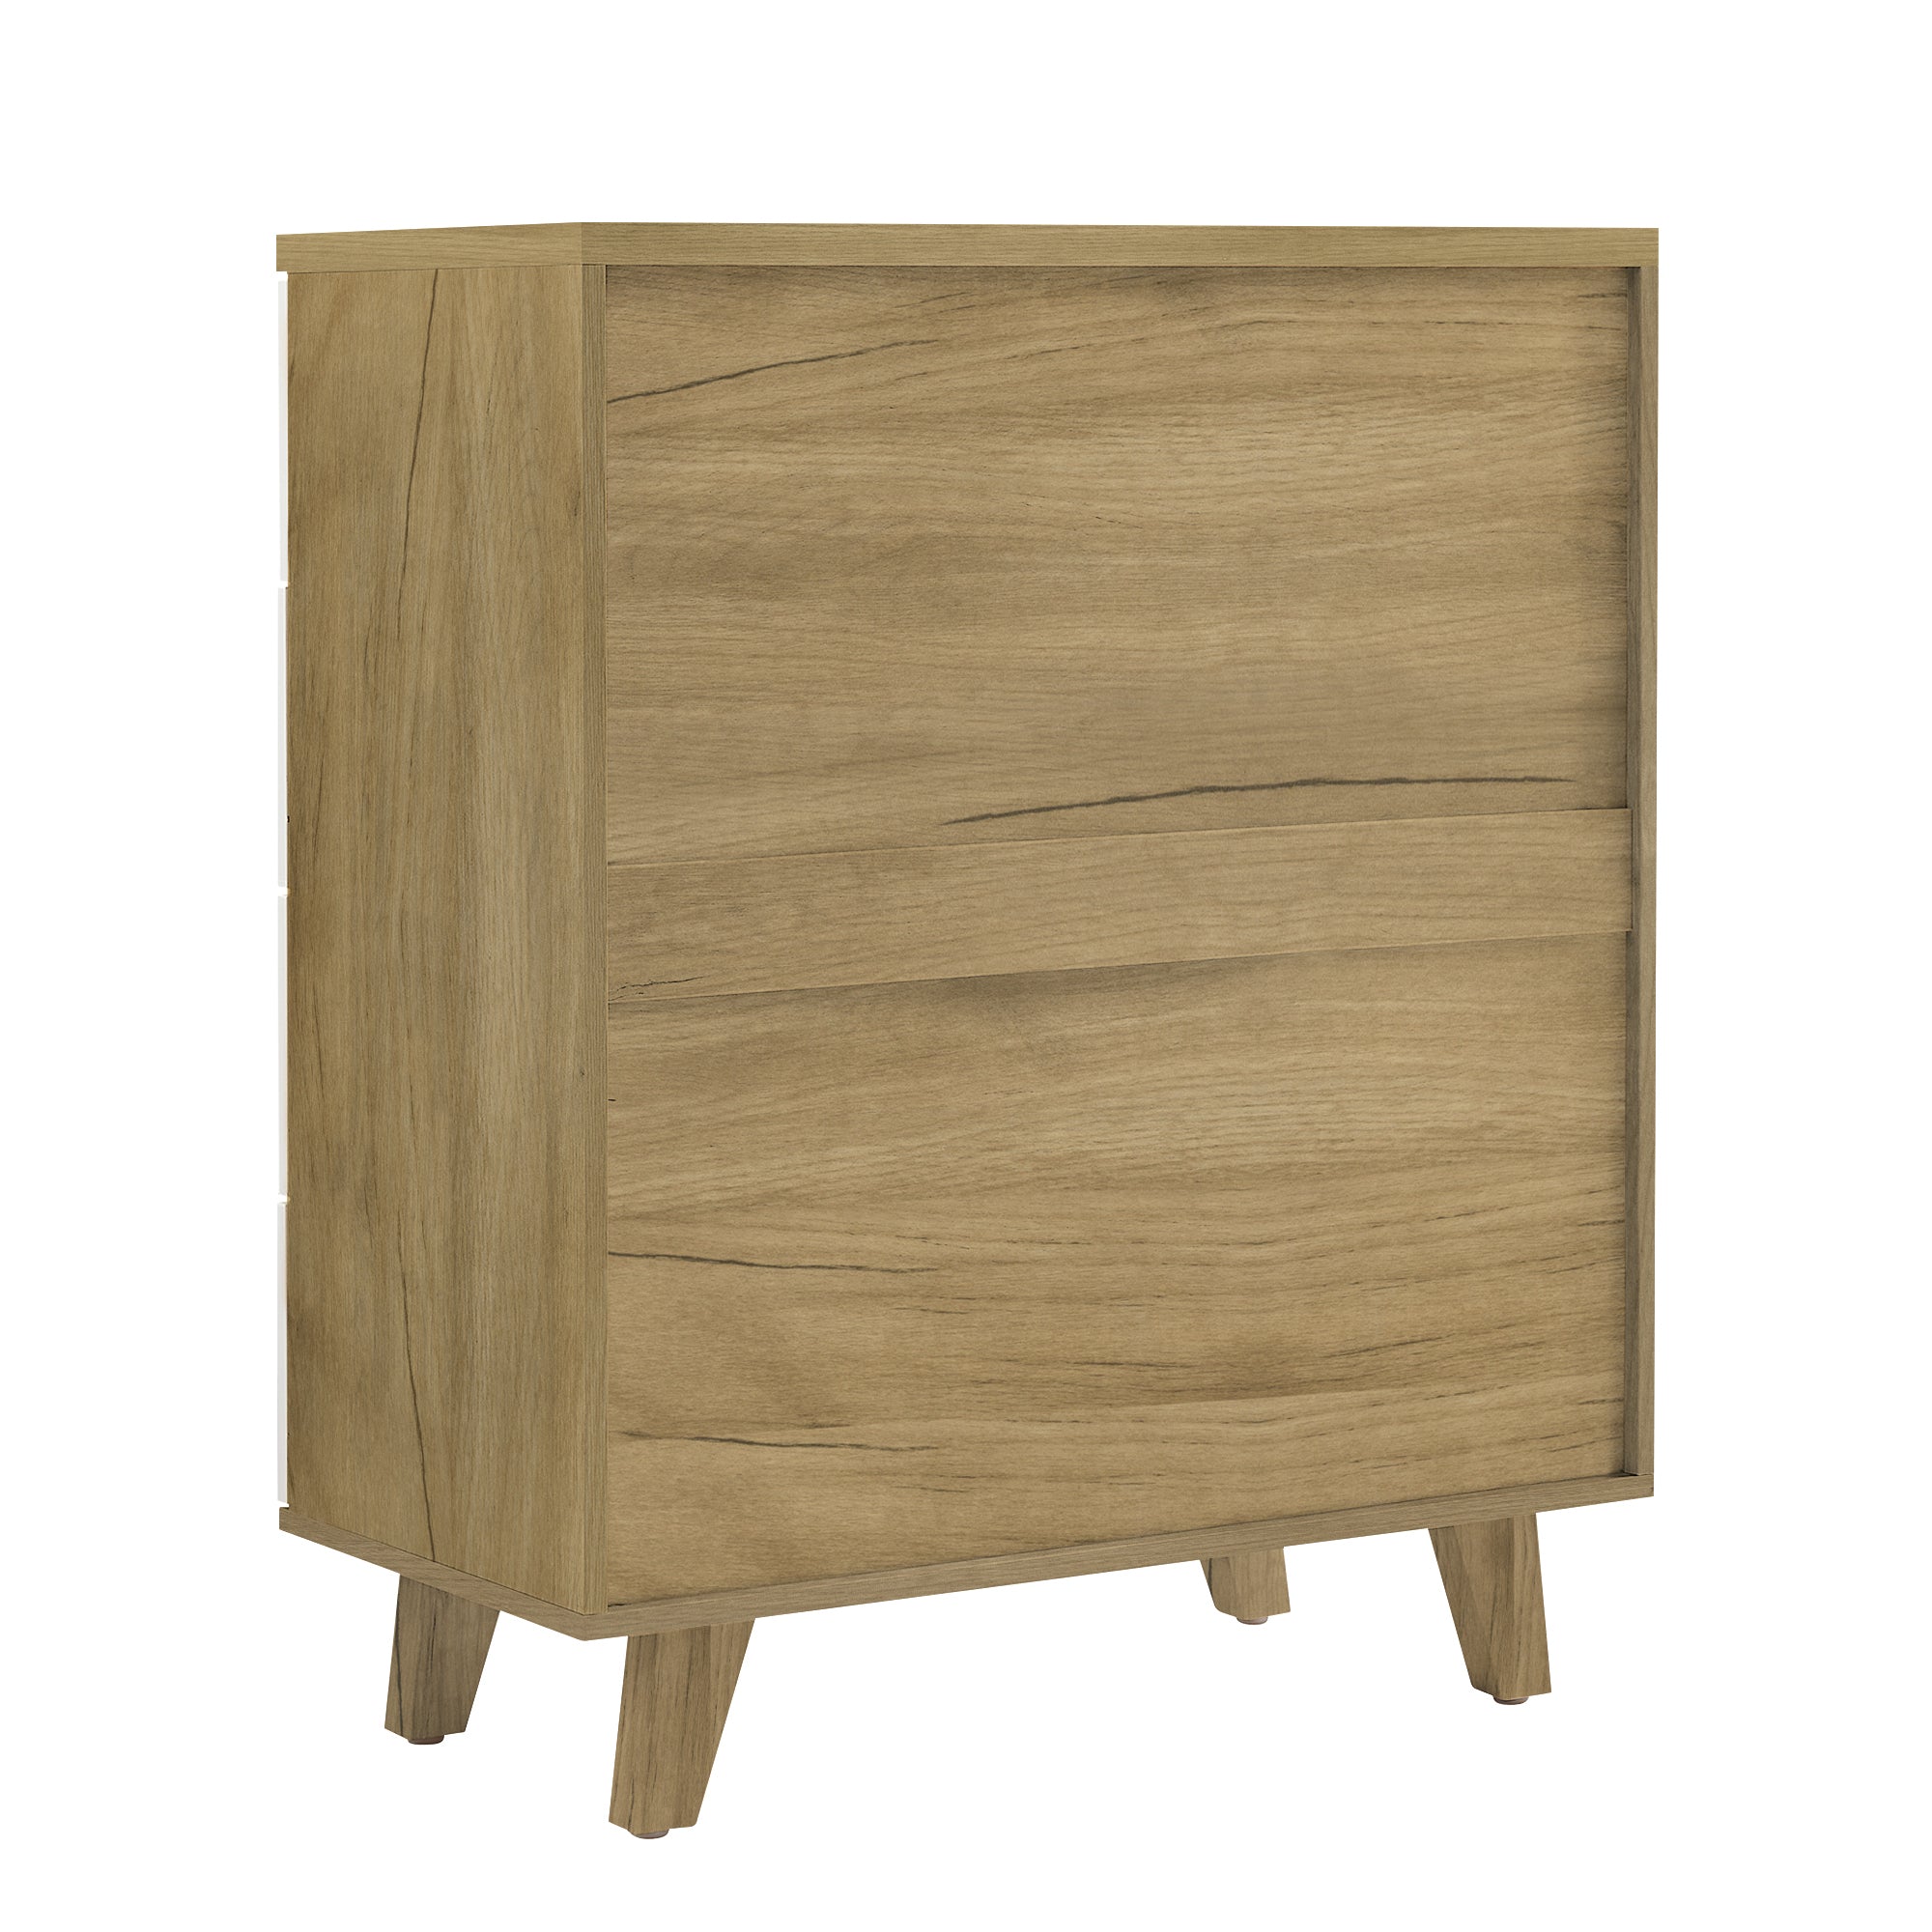 Storage Cabinet with Solid Wood Handles and Foot Stand - Rosewood